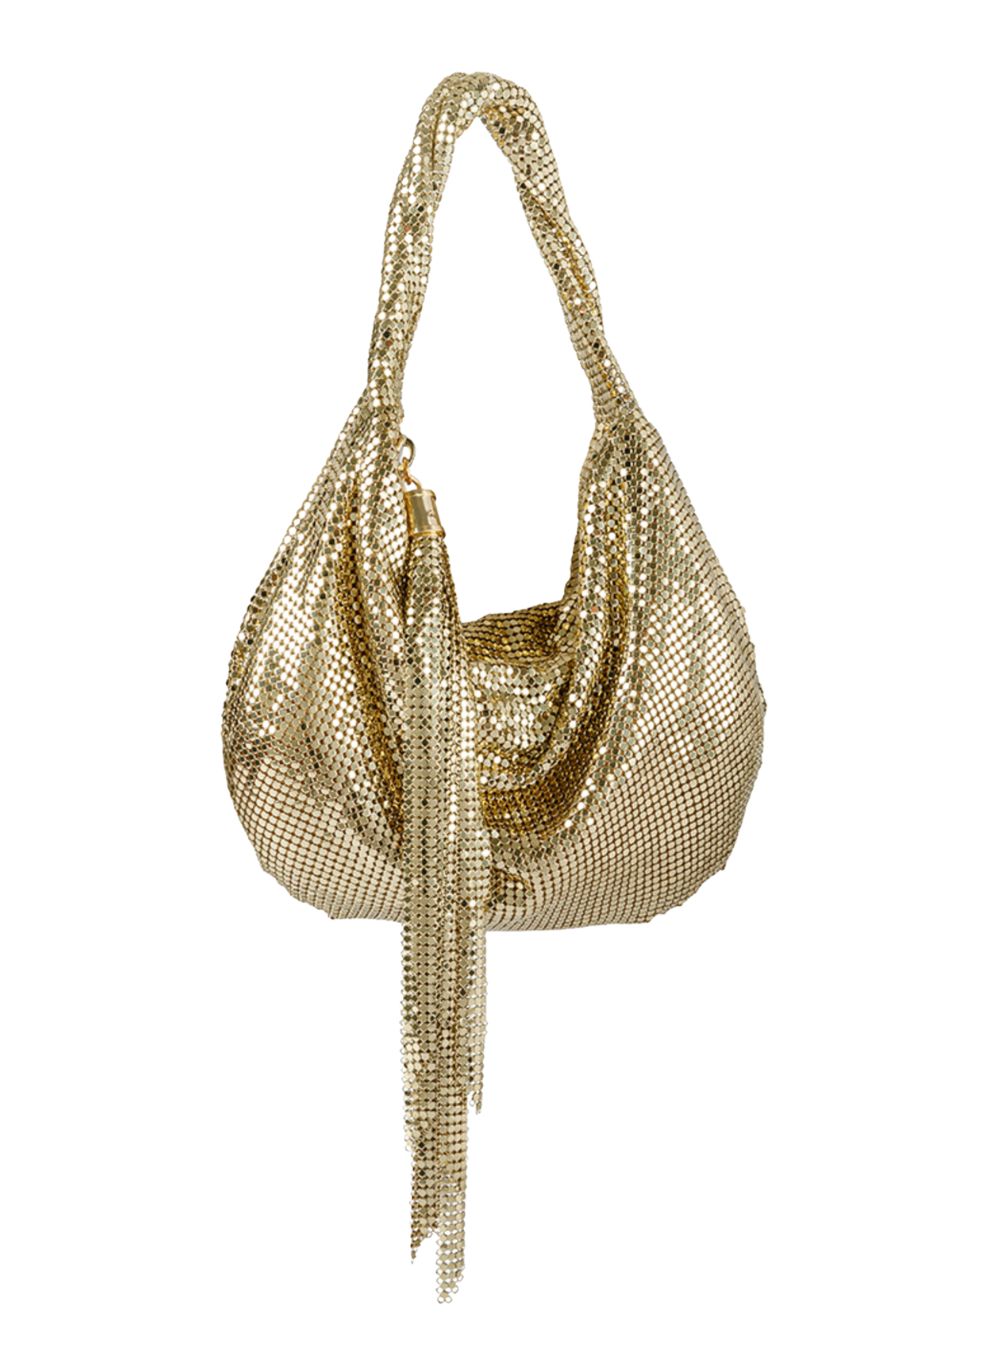 WHITING AND DAVIS | Marisol Twisted Hobo